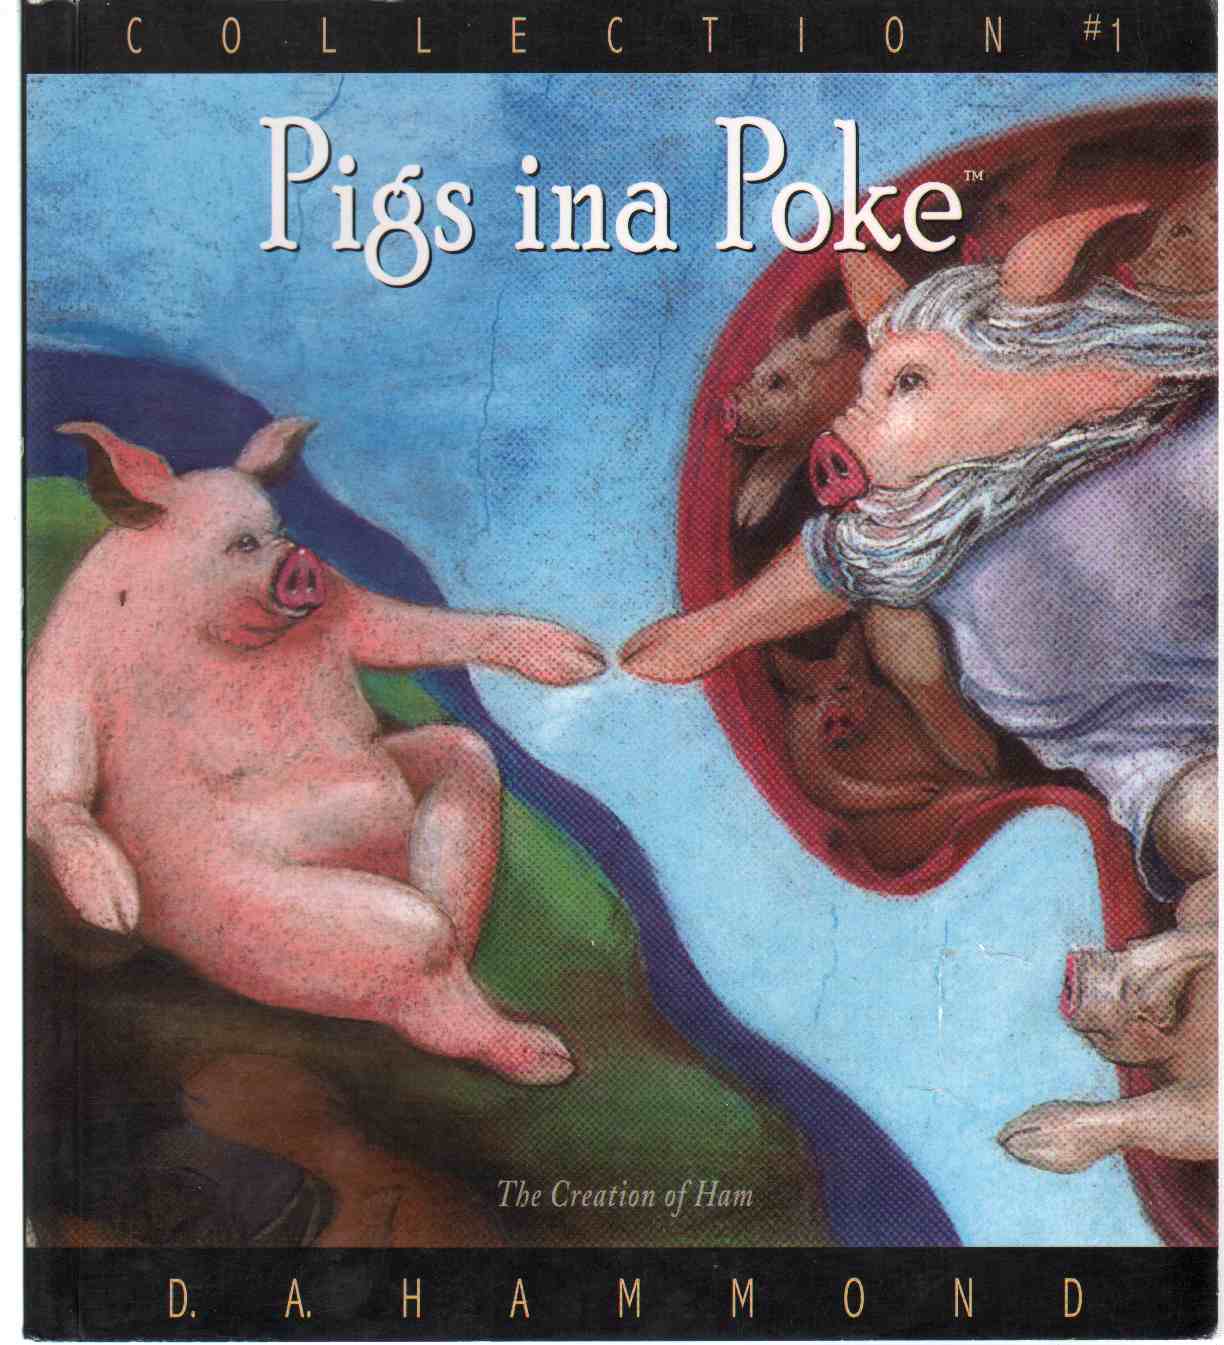 Hammond, D. A. - PIGS INA POKE Collection #1